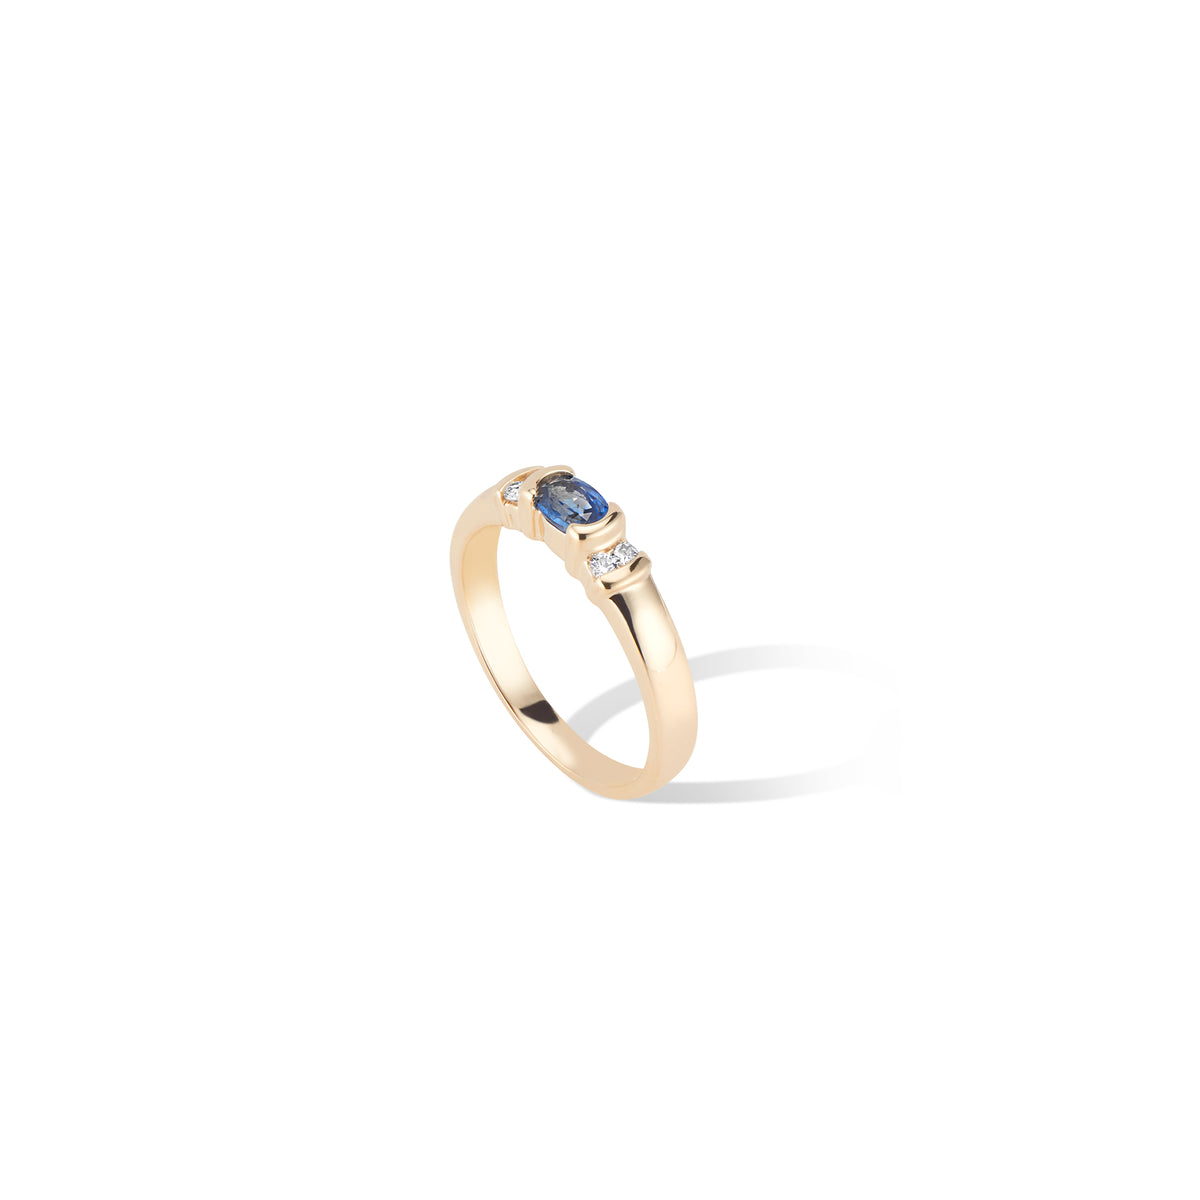 Vintage 14K Yellow Gold Diamond East West Oval Sapphire Ring - Side Profile